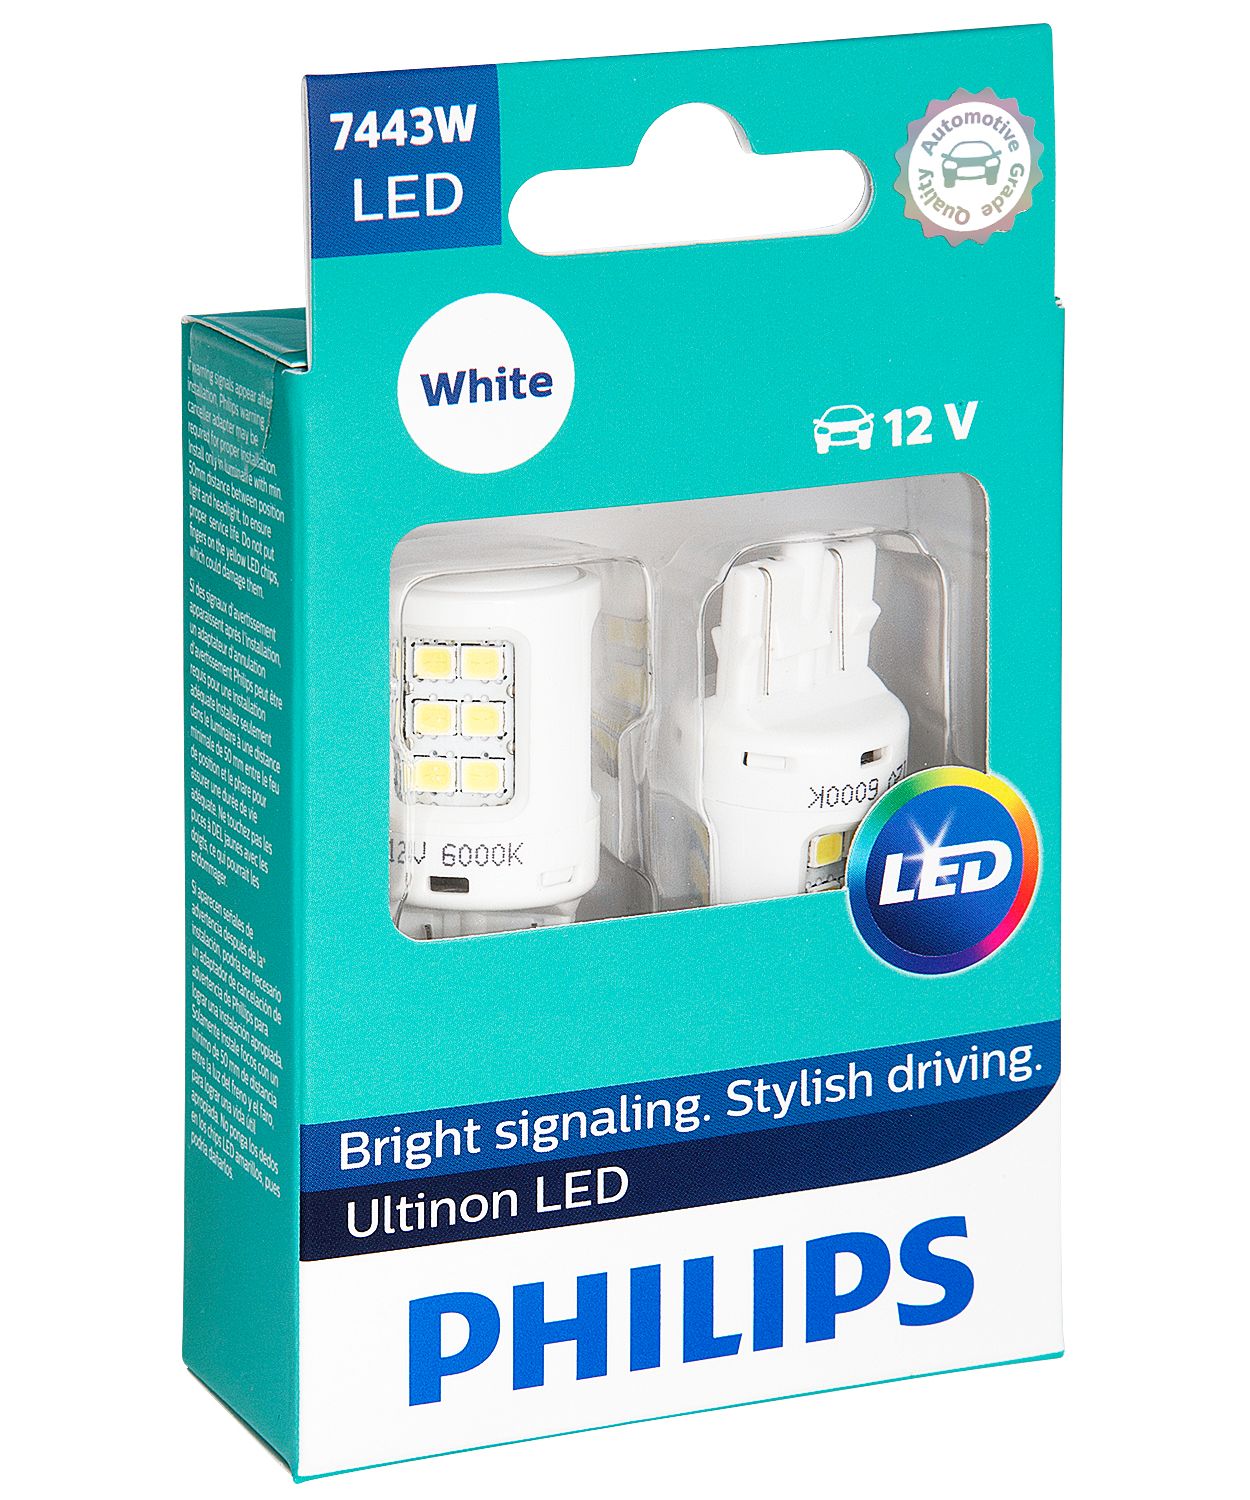 Philips Ultinon LED 7443 White Miniature Bulb (2-Pack) 7443WLED - The Home  Depot